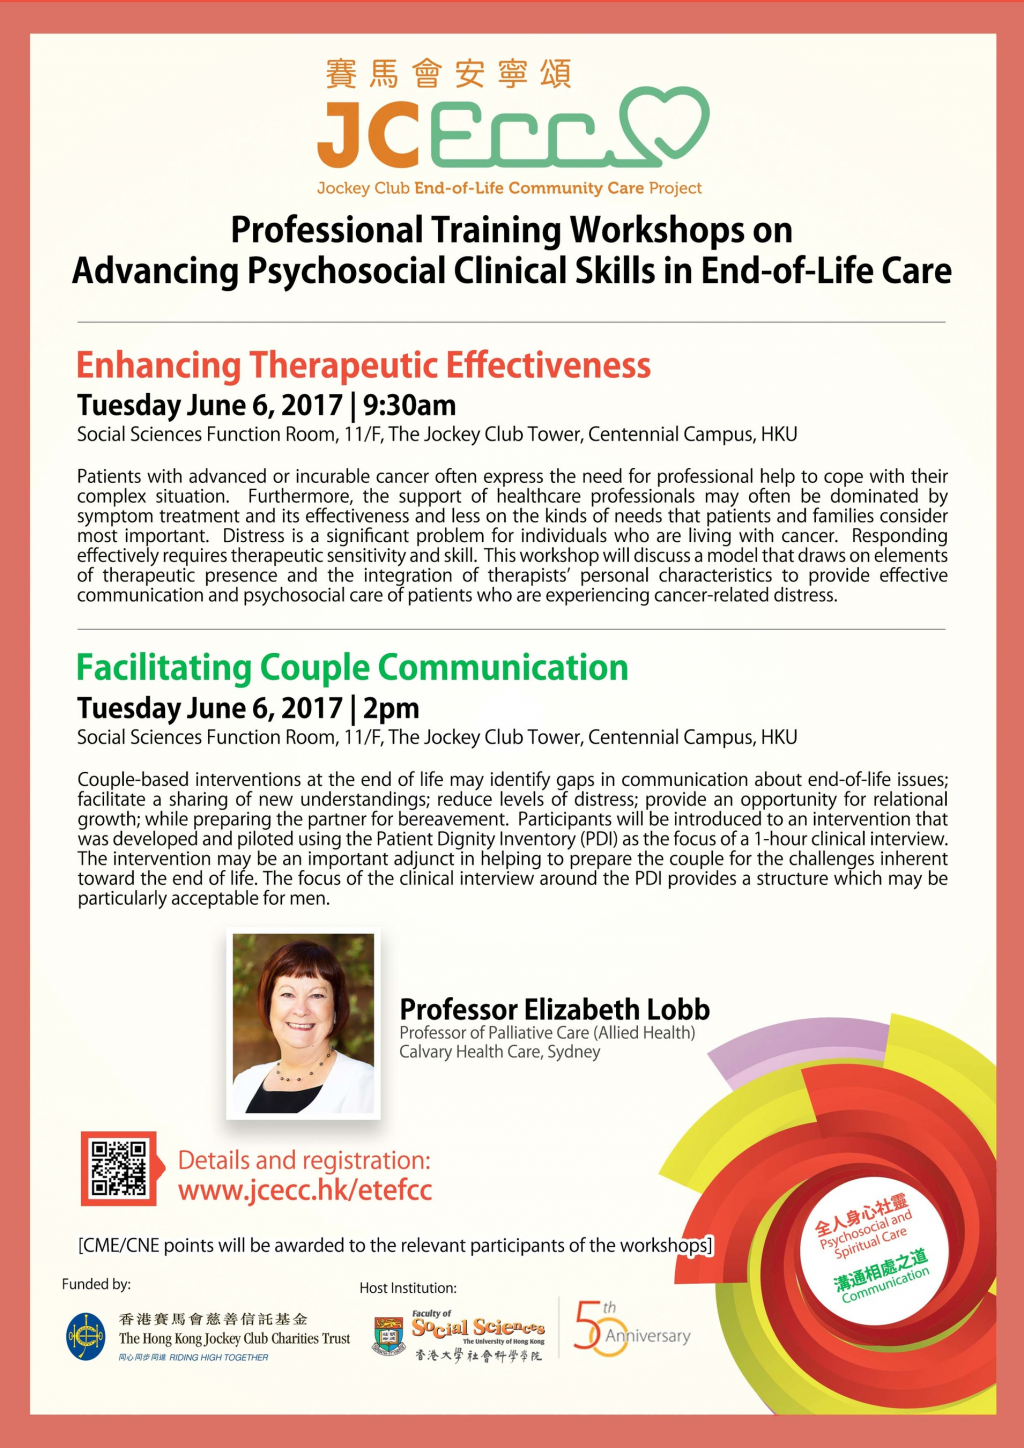 JCECC Workshops on Advancing Psychosocial Clinical Skills in End-of-Life Care